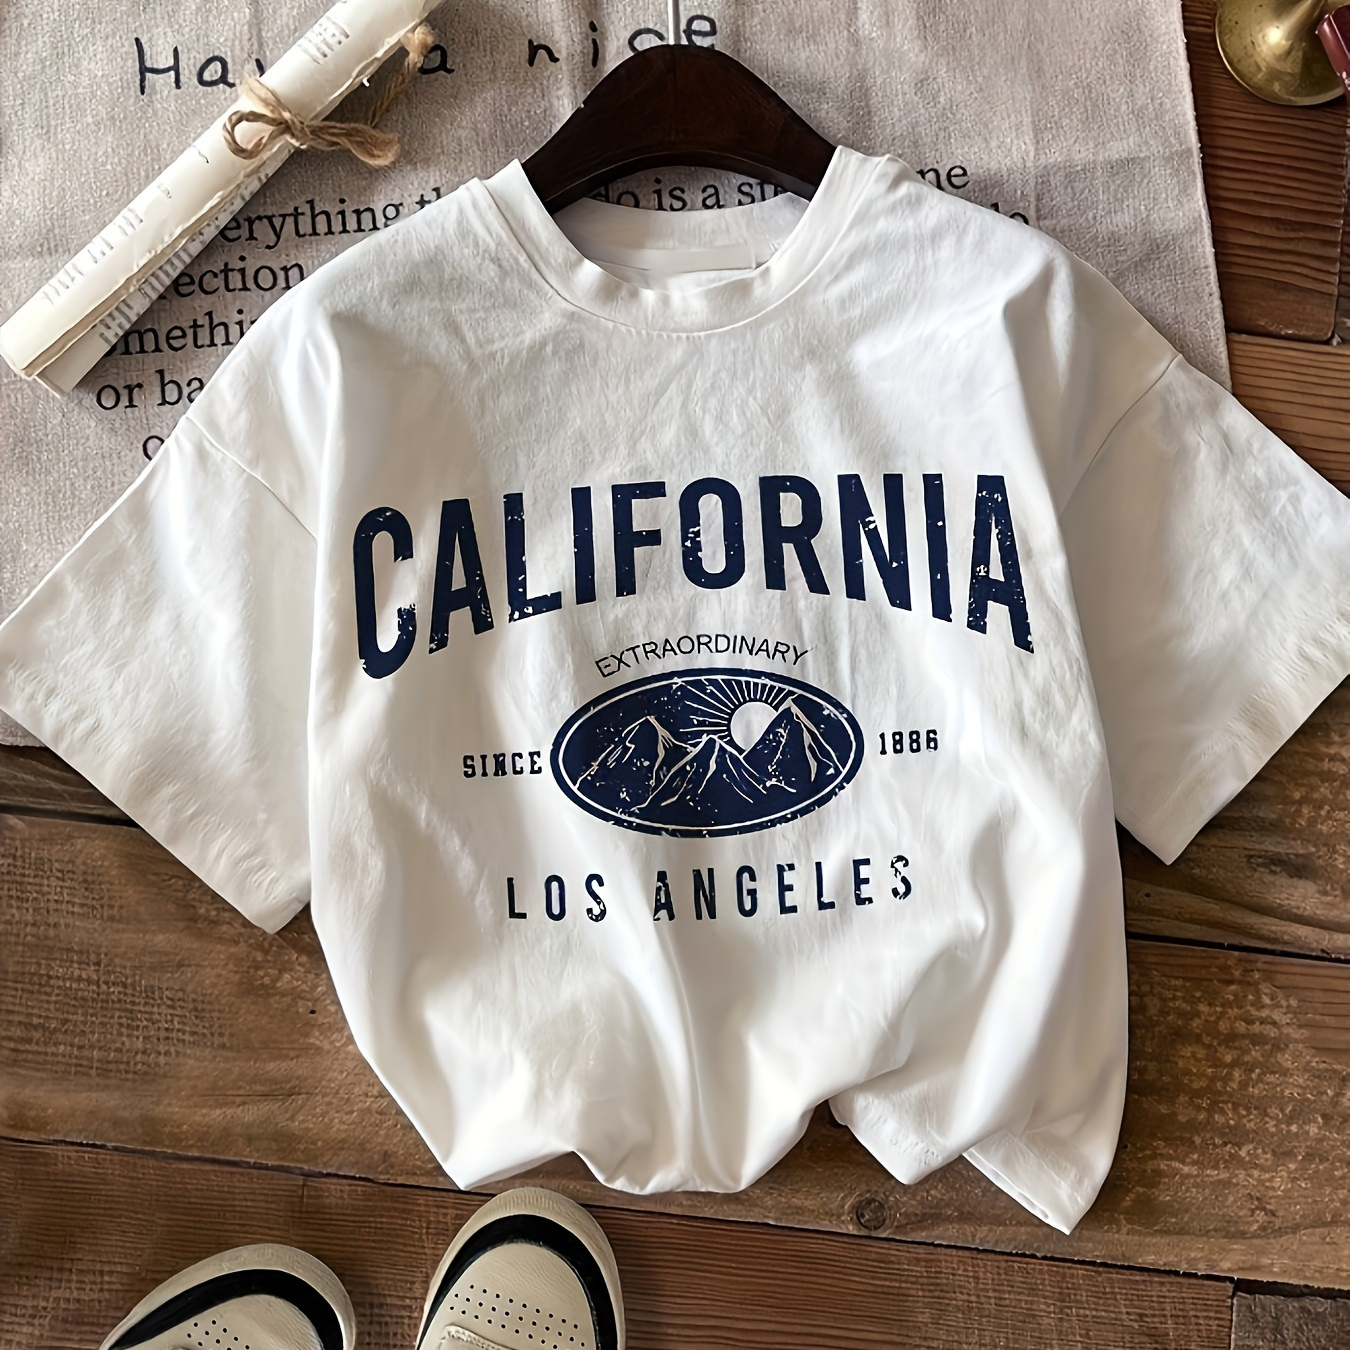 

Women's California Graphic T-shirt, Short Sleeve, Crew Neck, Casual Top, Mountain Print, Basic Style, For Everyday Wear